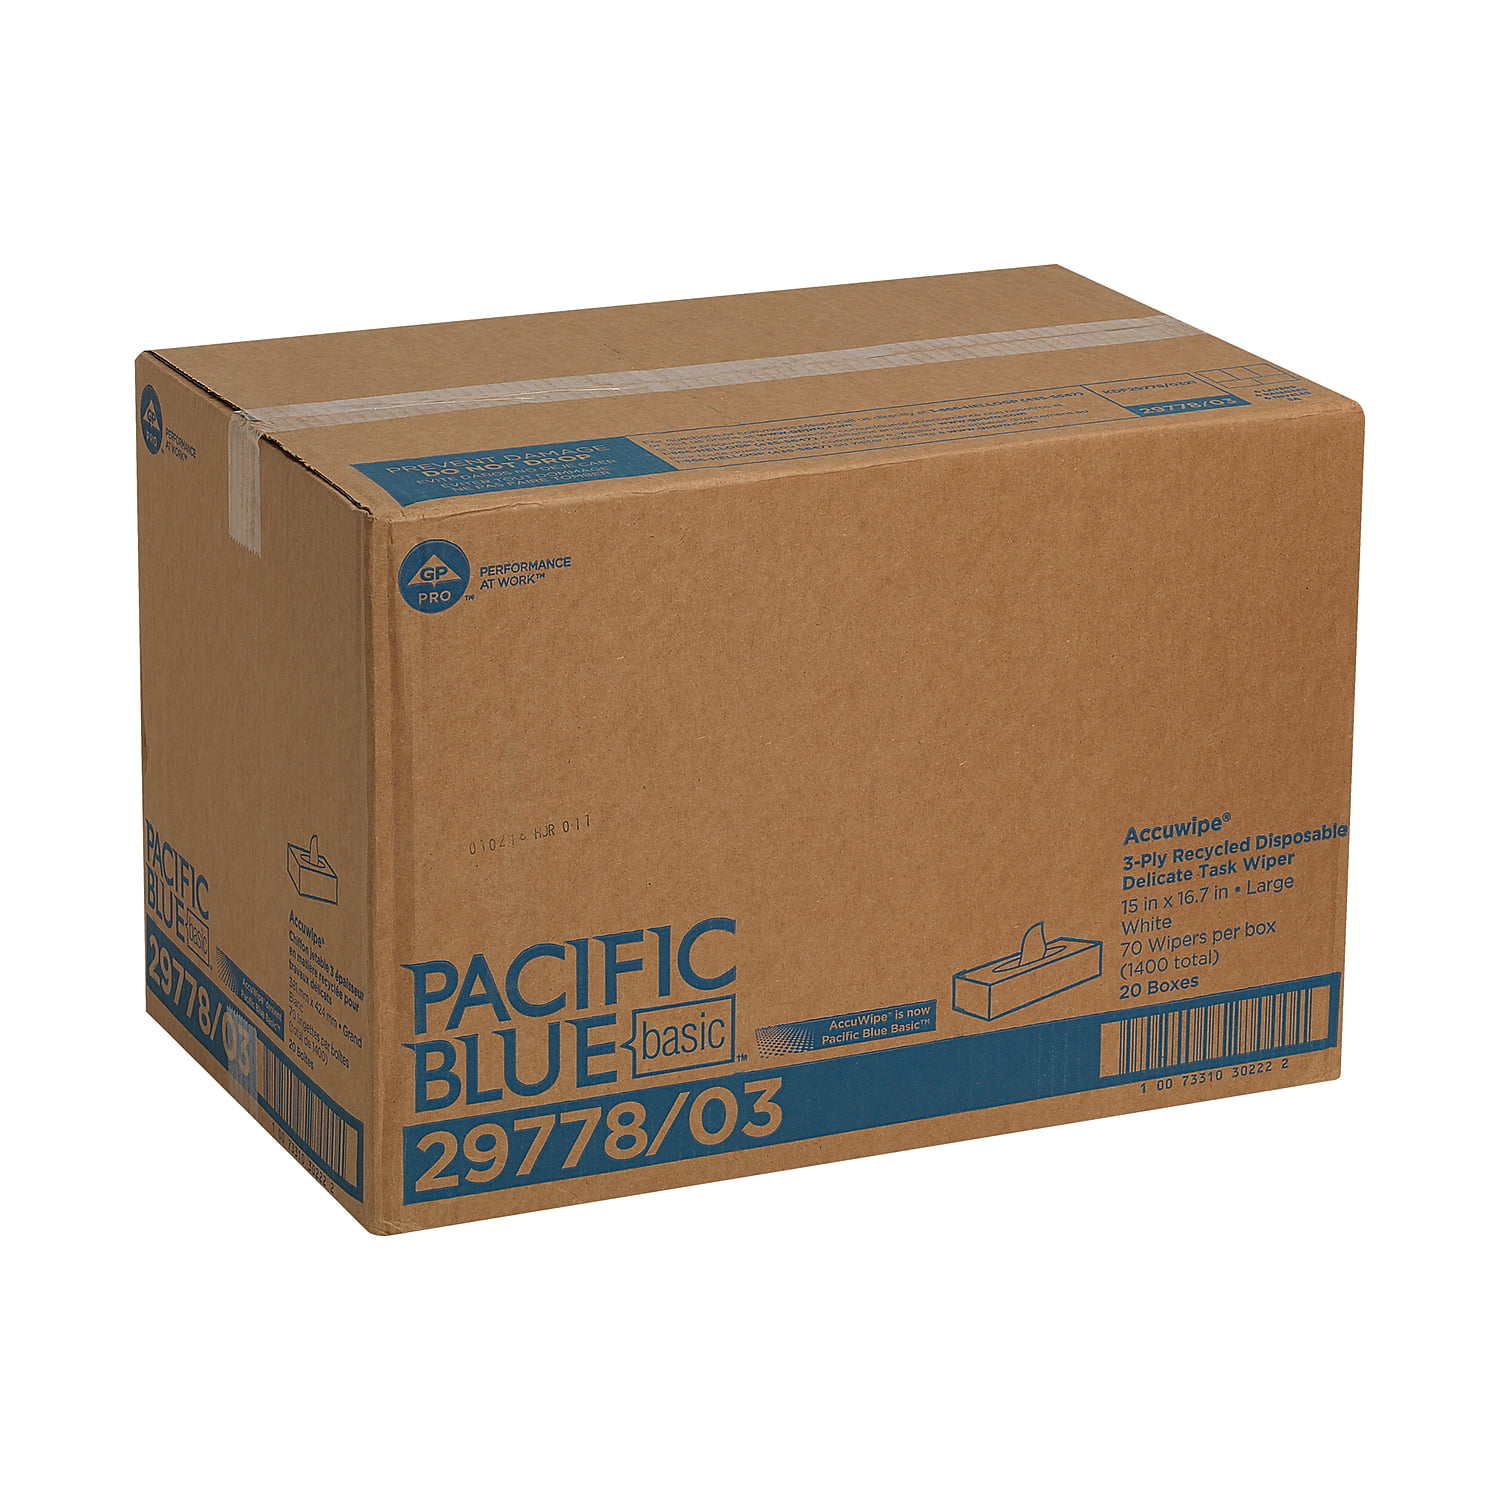 Pacific Blue Basic AccuWipe Disposable 3-Ply Delicate Task Recycled Wiper by GP PRO 29778/03 Georgia-Pacific White Case of 20 Boxes, 70 Wipers per Box 